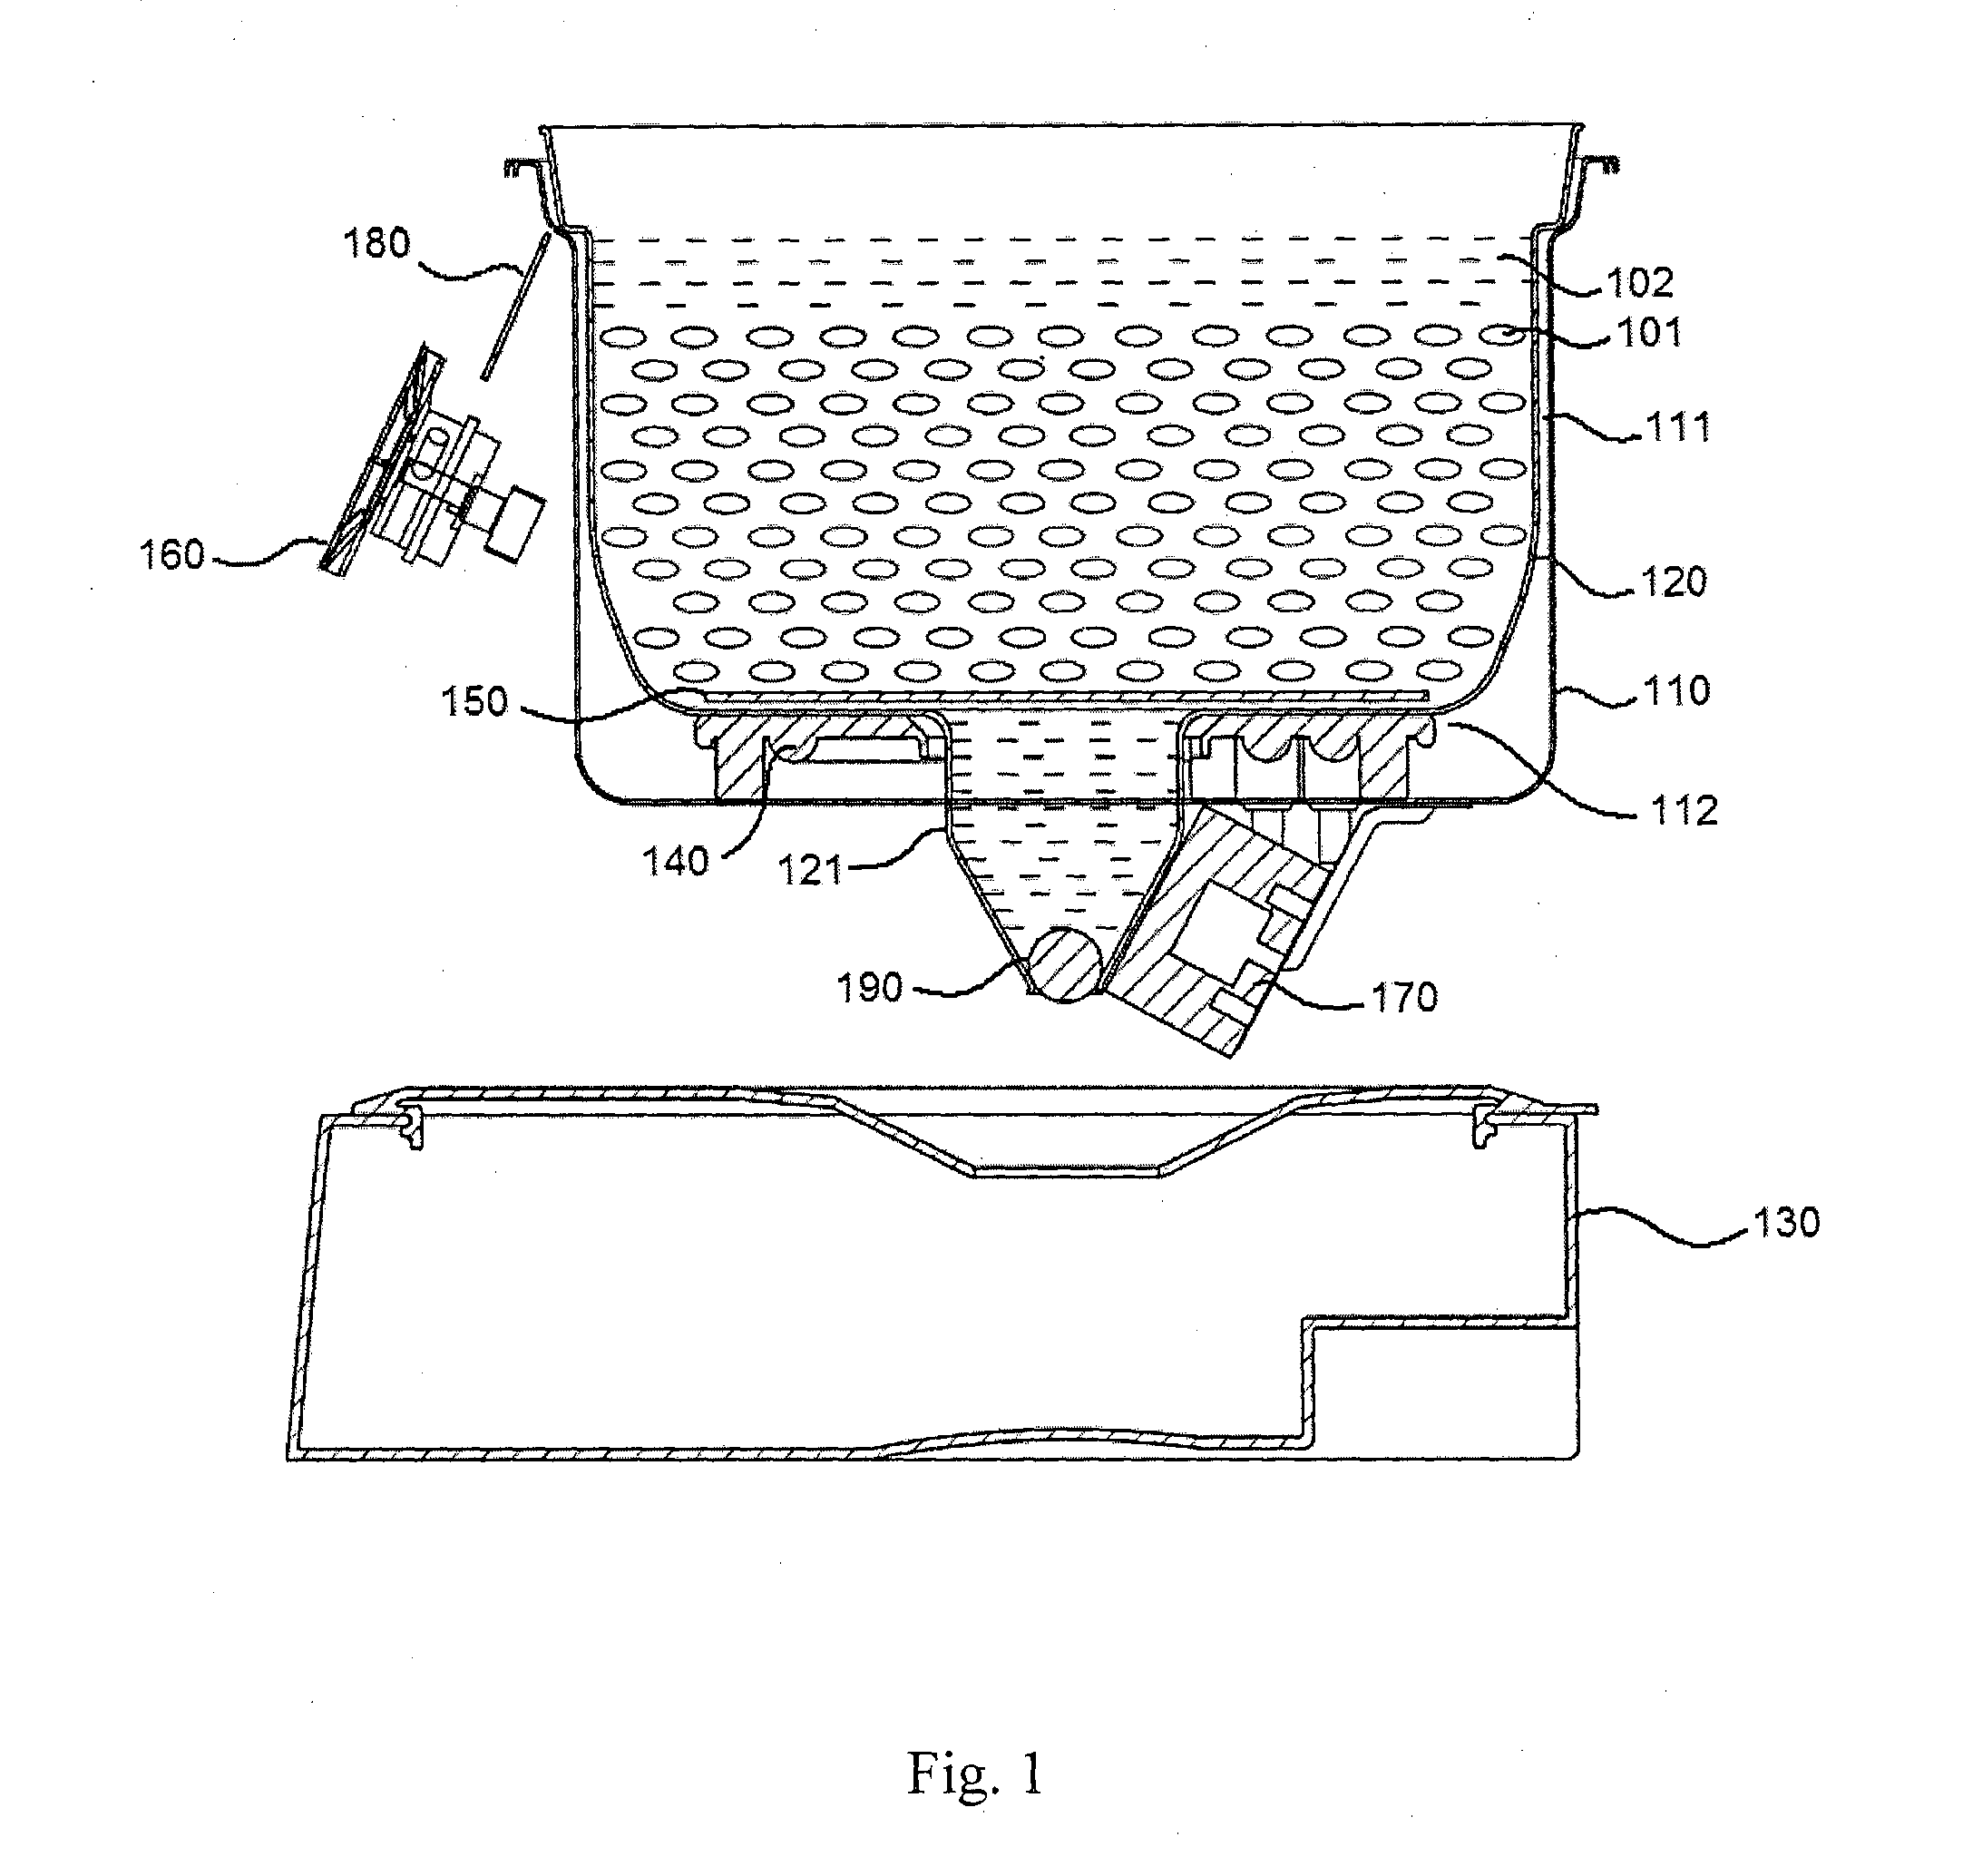 Apparatus for cooking food